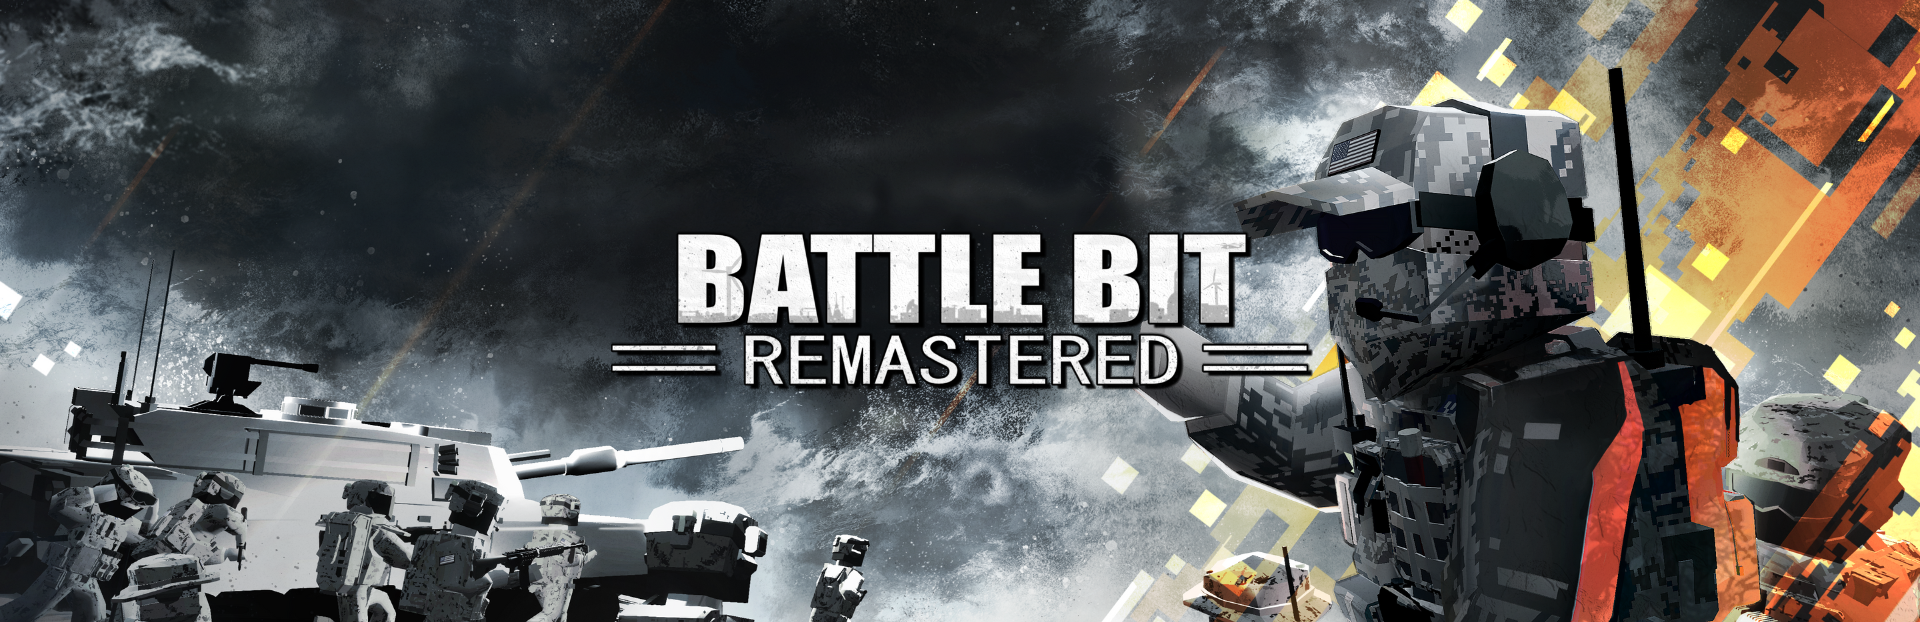 how to play battlebit remastered on mac